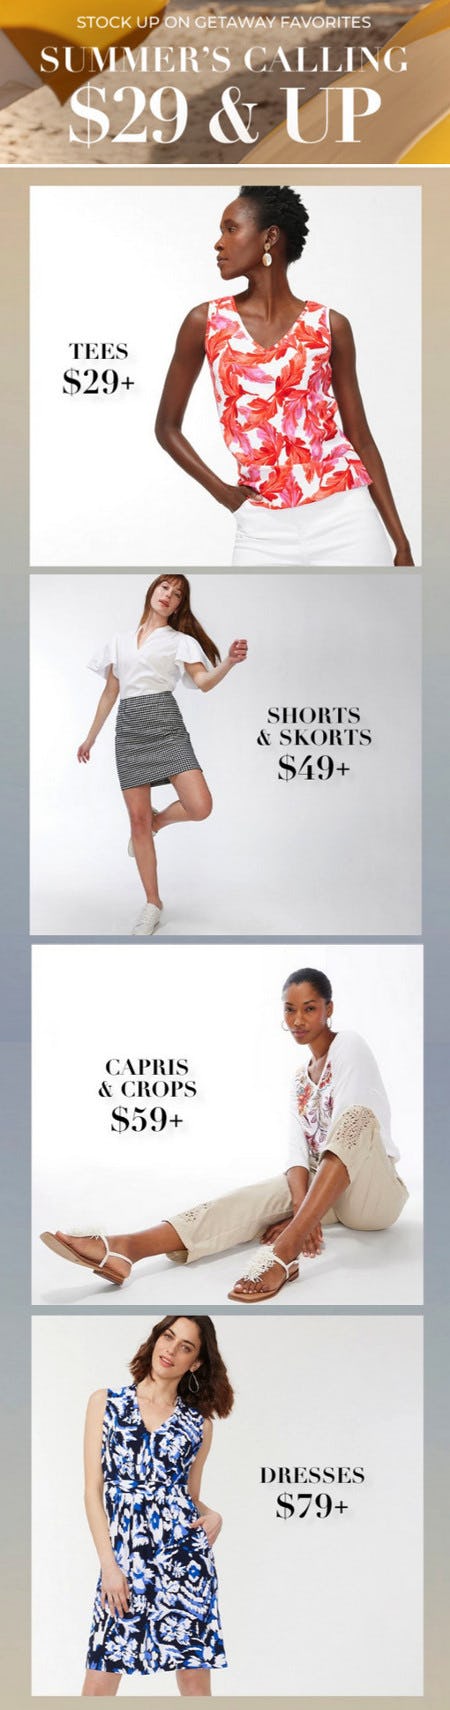 Select Styles $29 and Up from Chico's